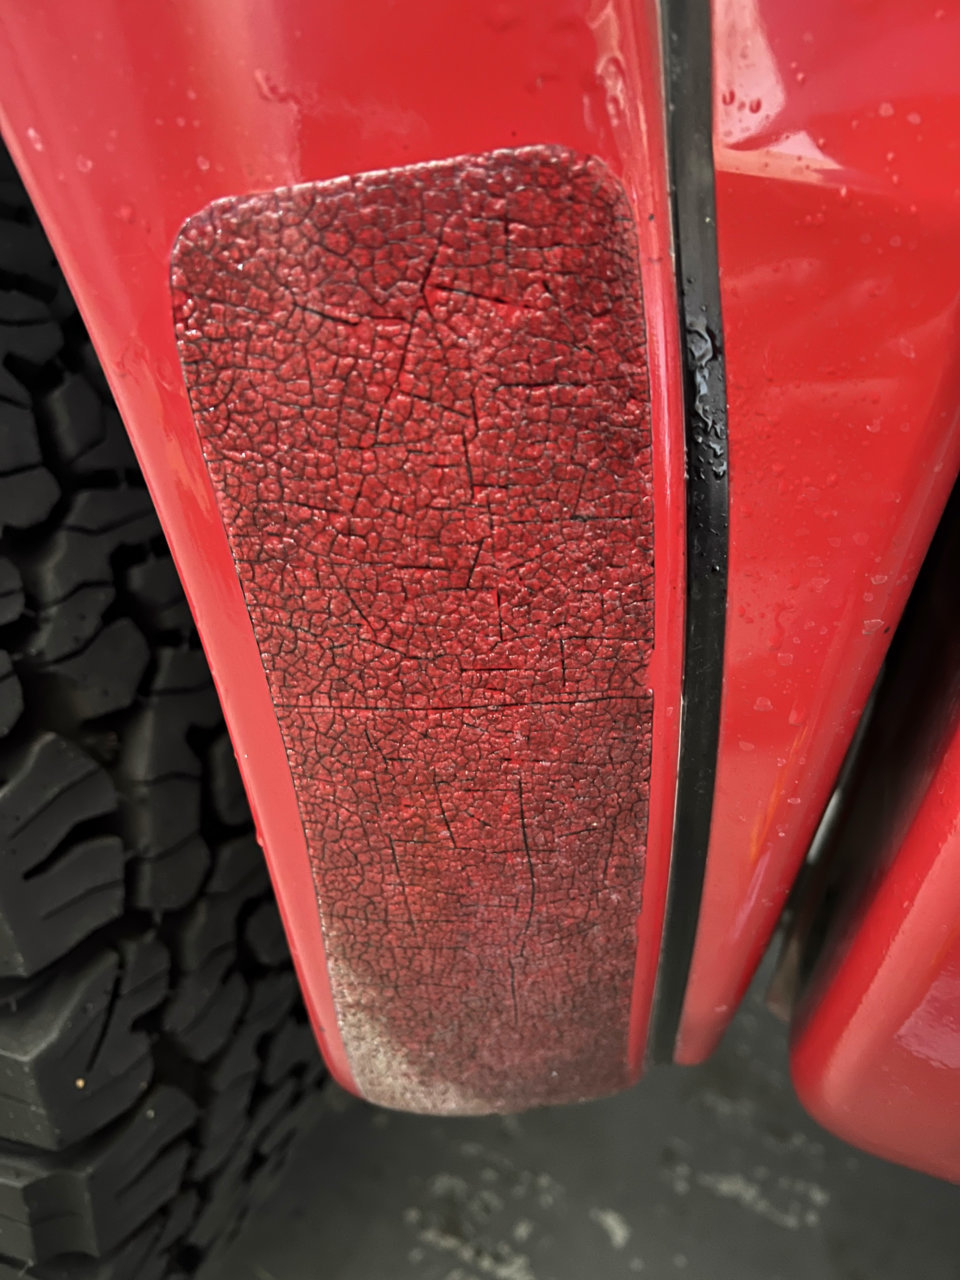 How To Remove Fender Flare Adhesive: Quick & Easy Tips